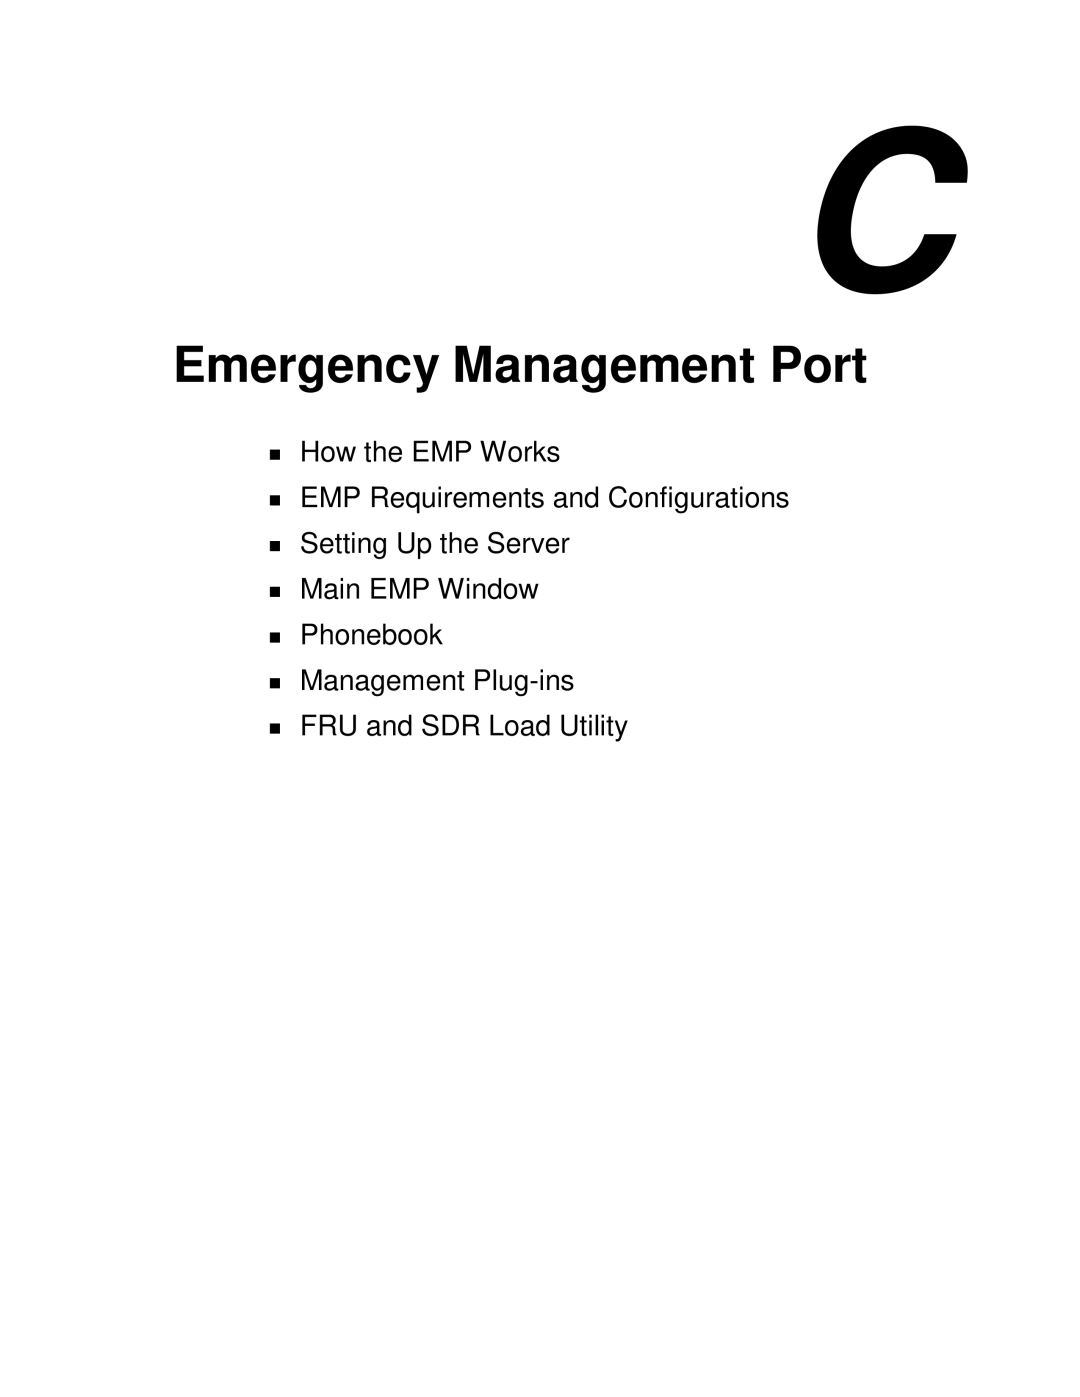 NEC MH4500 manual Emergency Management Port, How the EMP Works, EMP Requirements and Configurations 